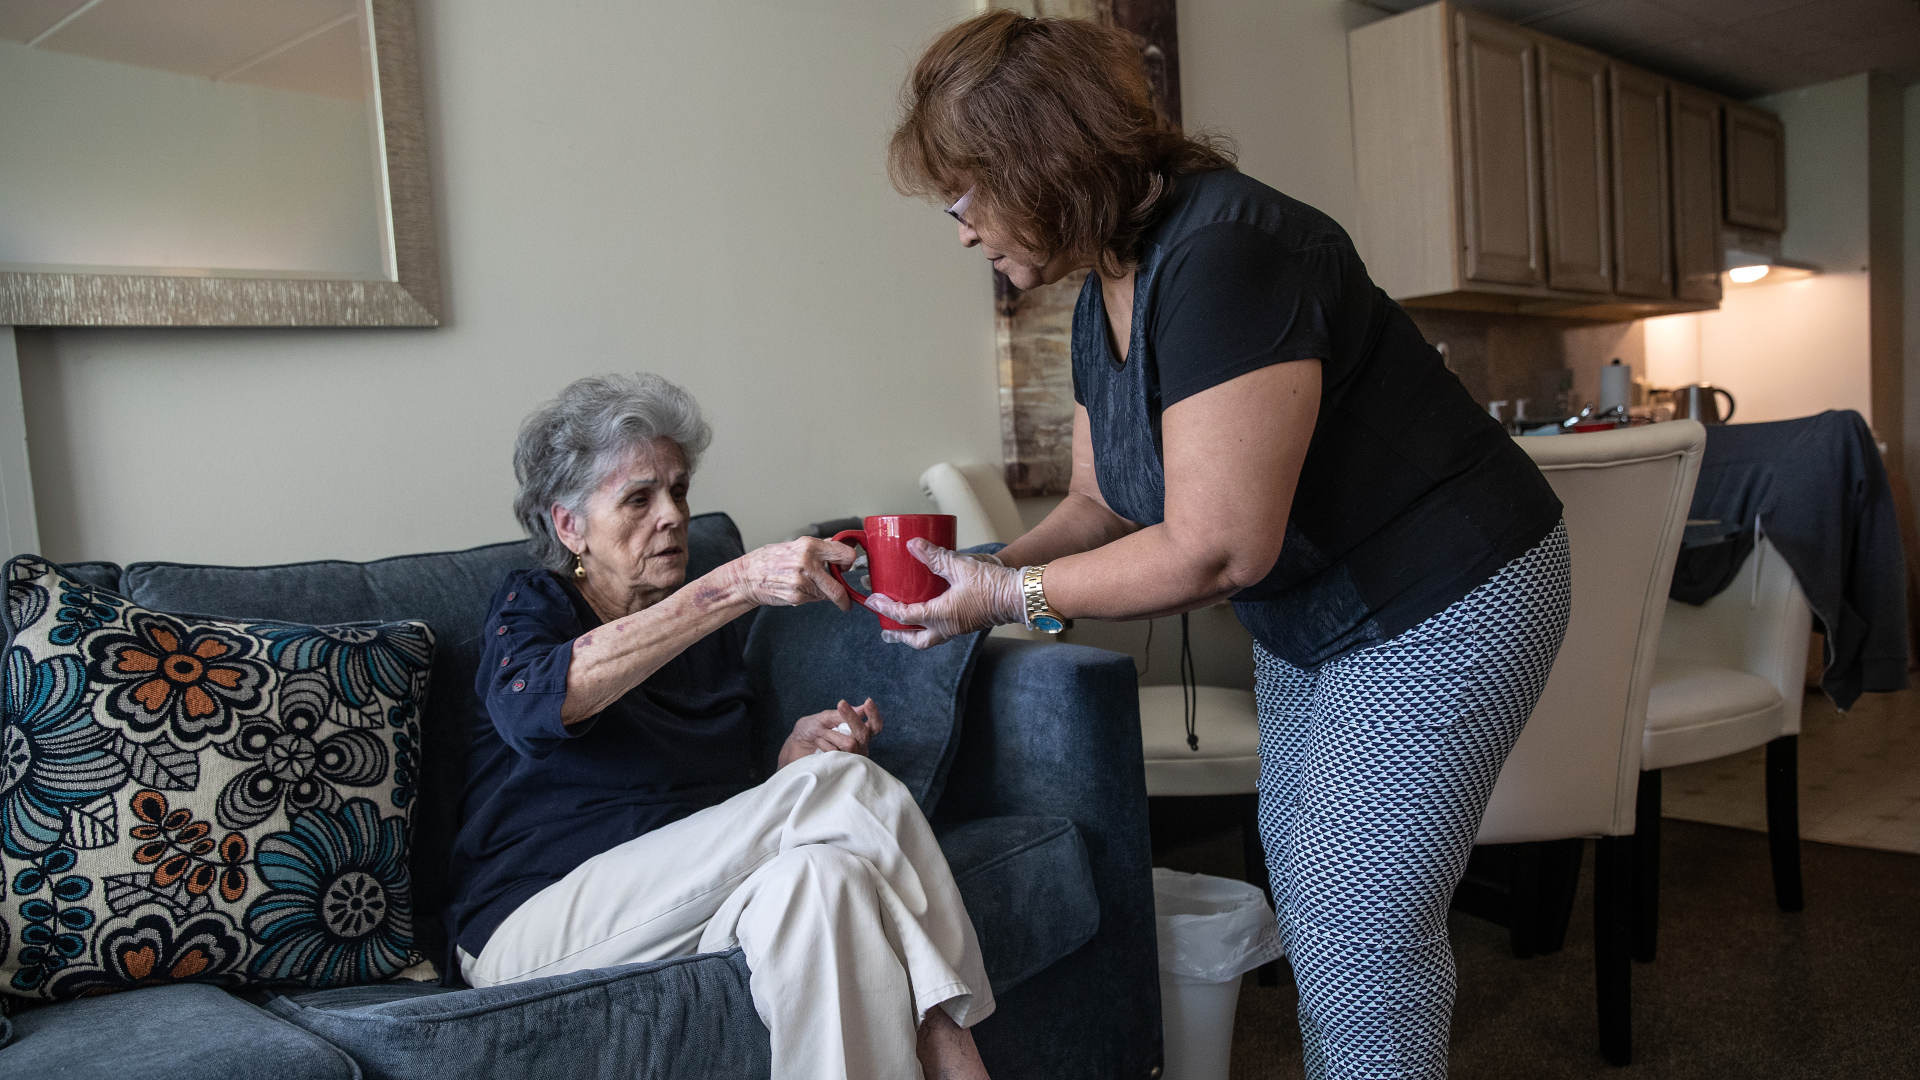 Janet Gazo, 89, receives tea from her home health care worker while continuing to fully recover from Covid-19 at home in May 2020.